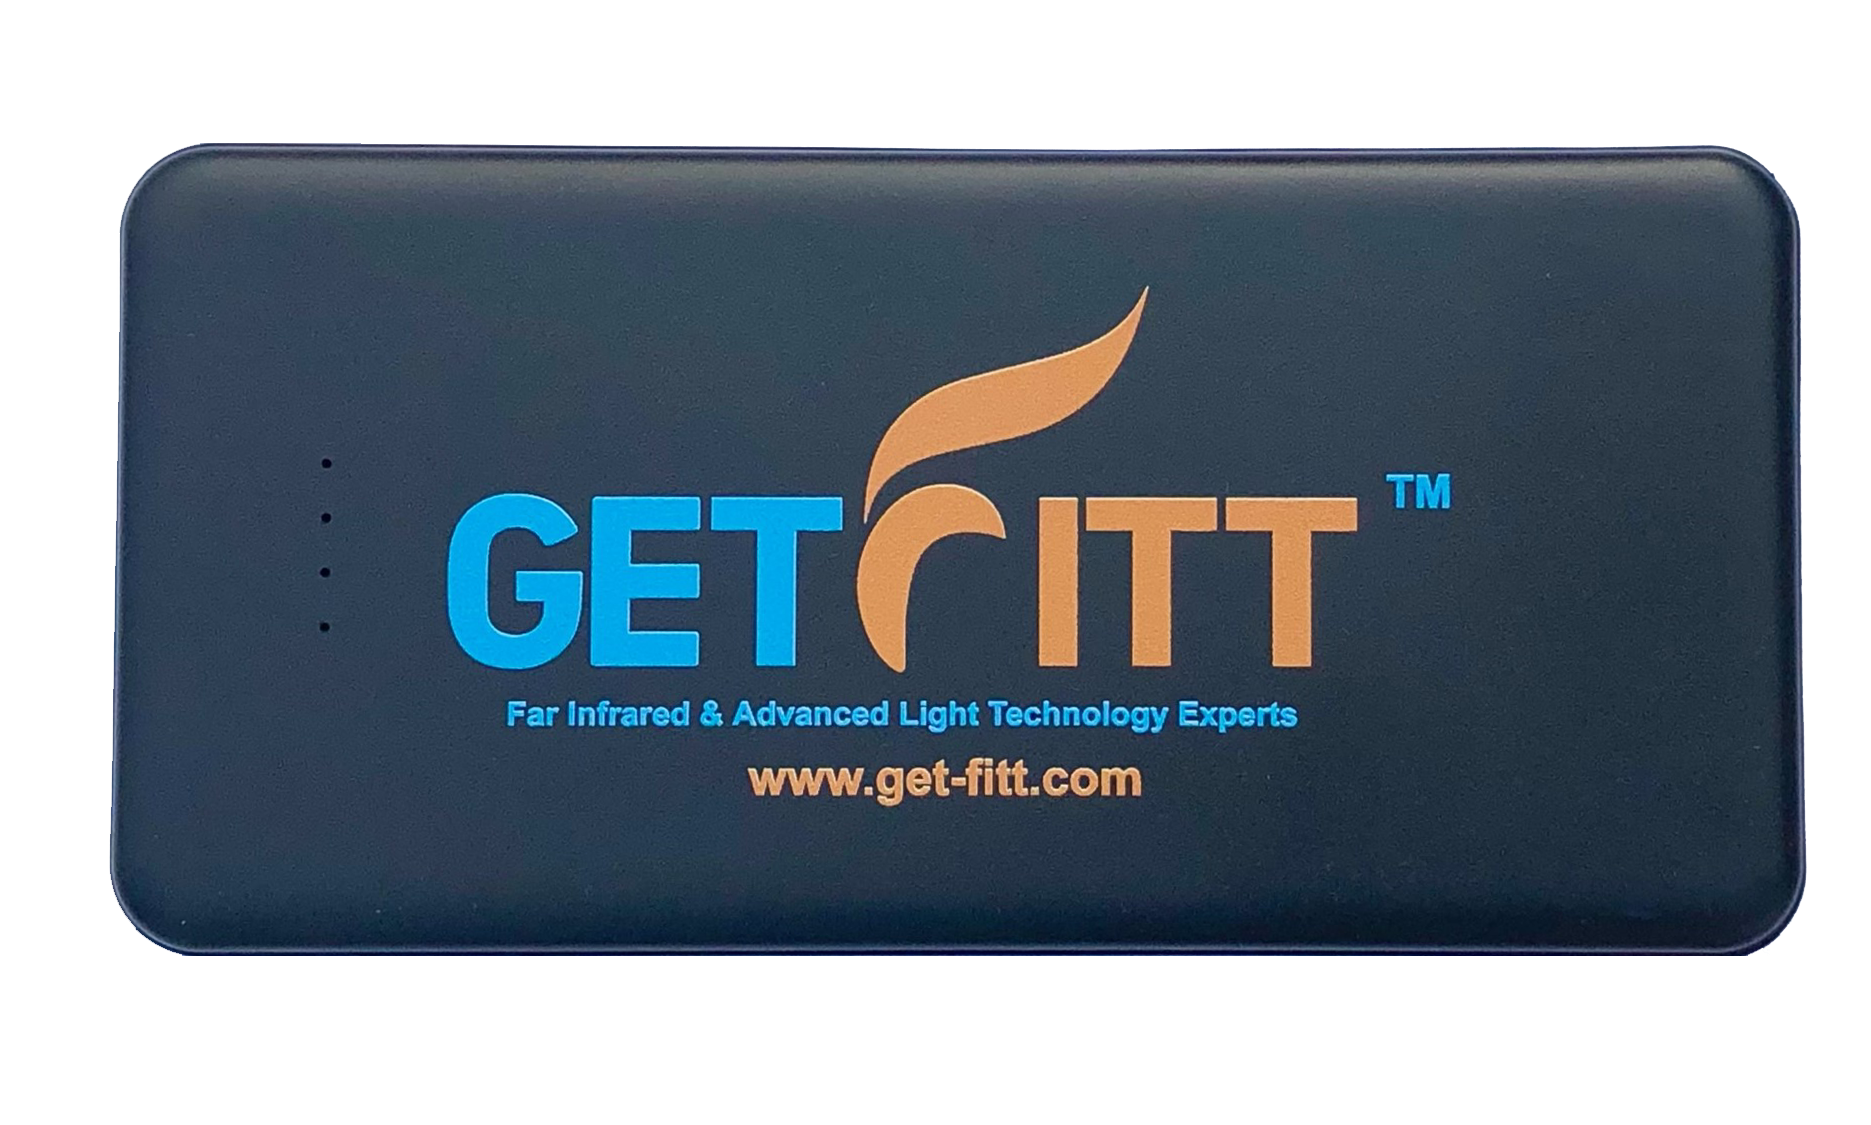 Get Fitt Powerbank- 10,000 mah - Only Available in the UK